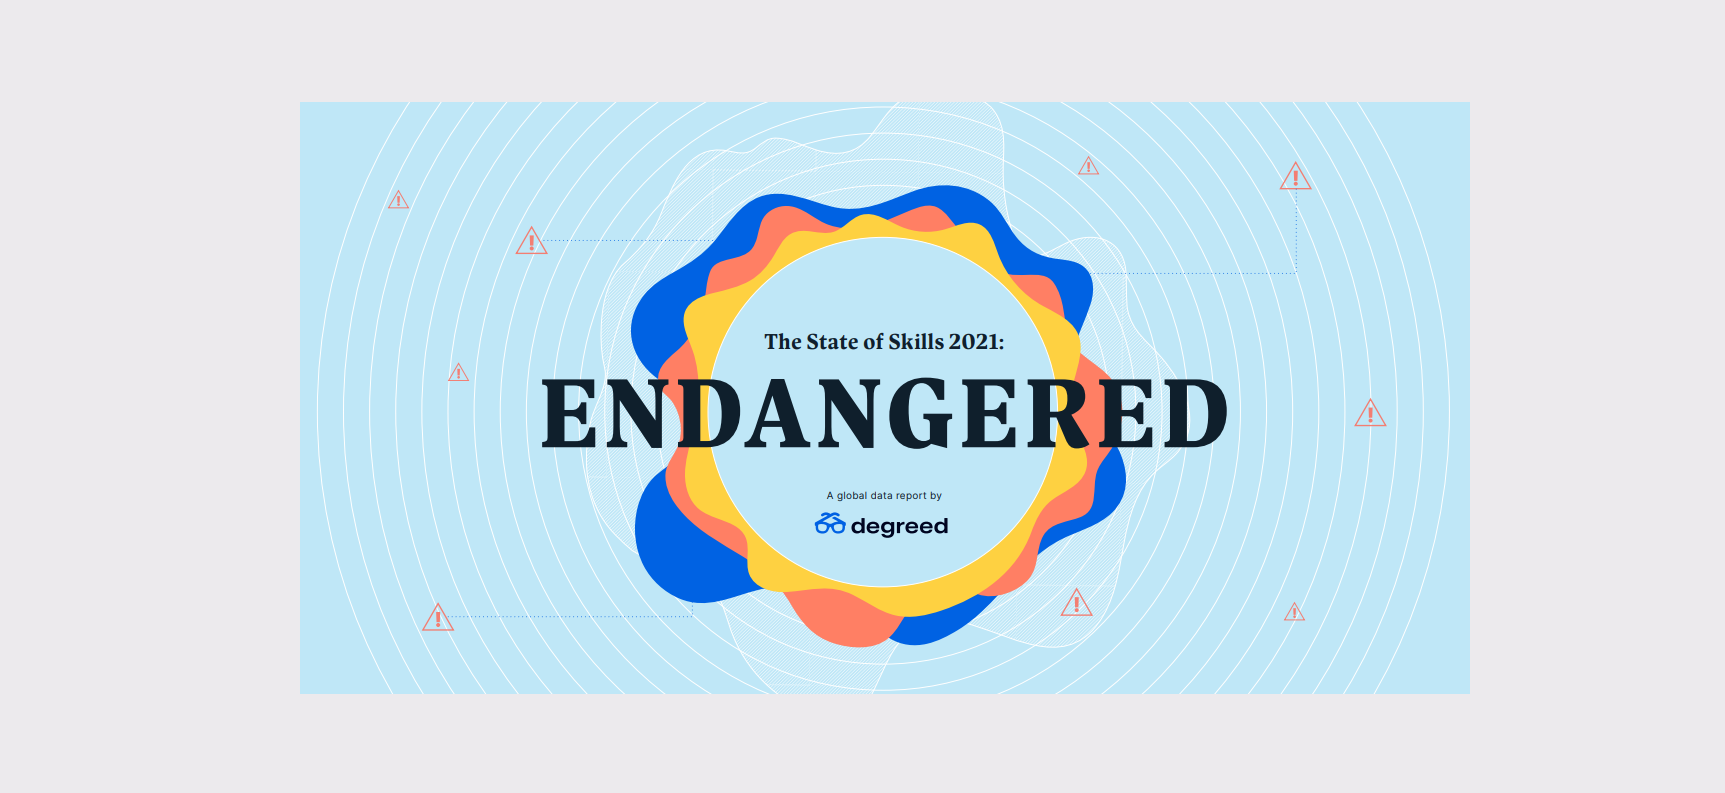 The State of Skills 2021: ENDANGERED